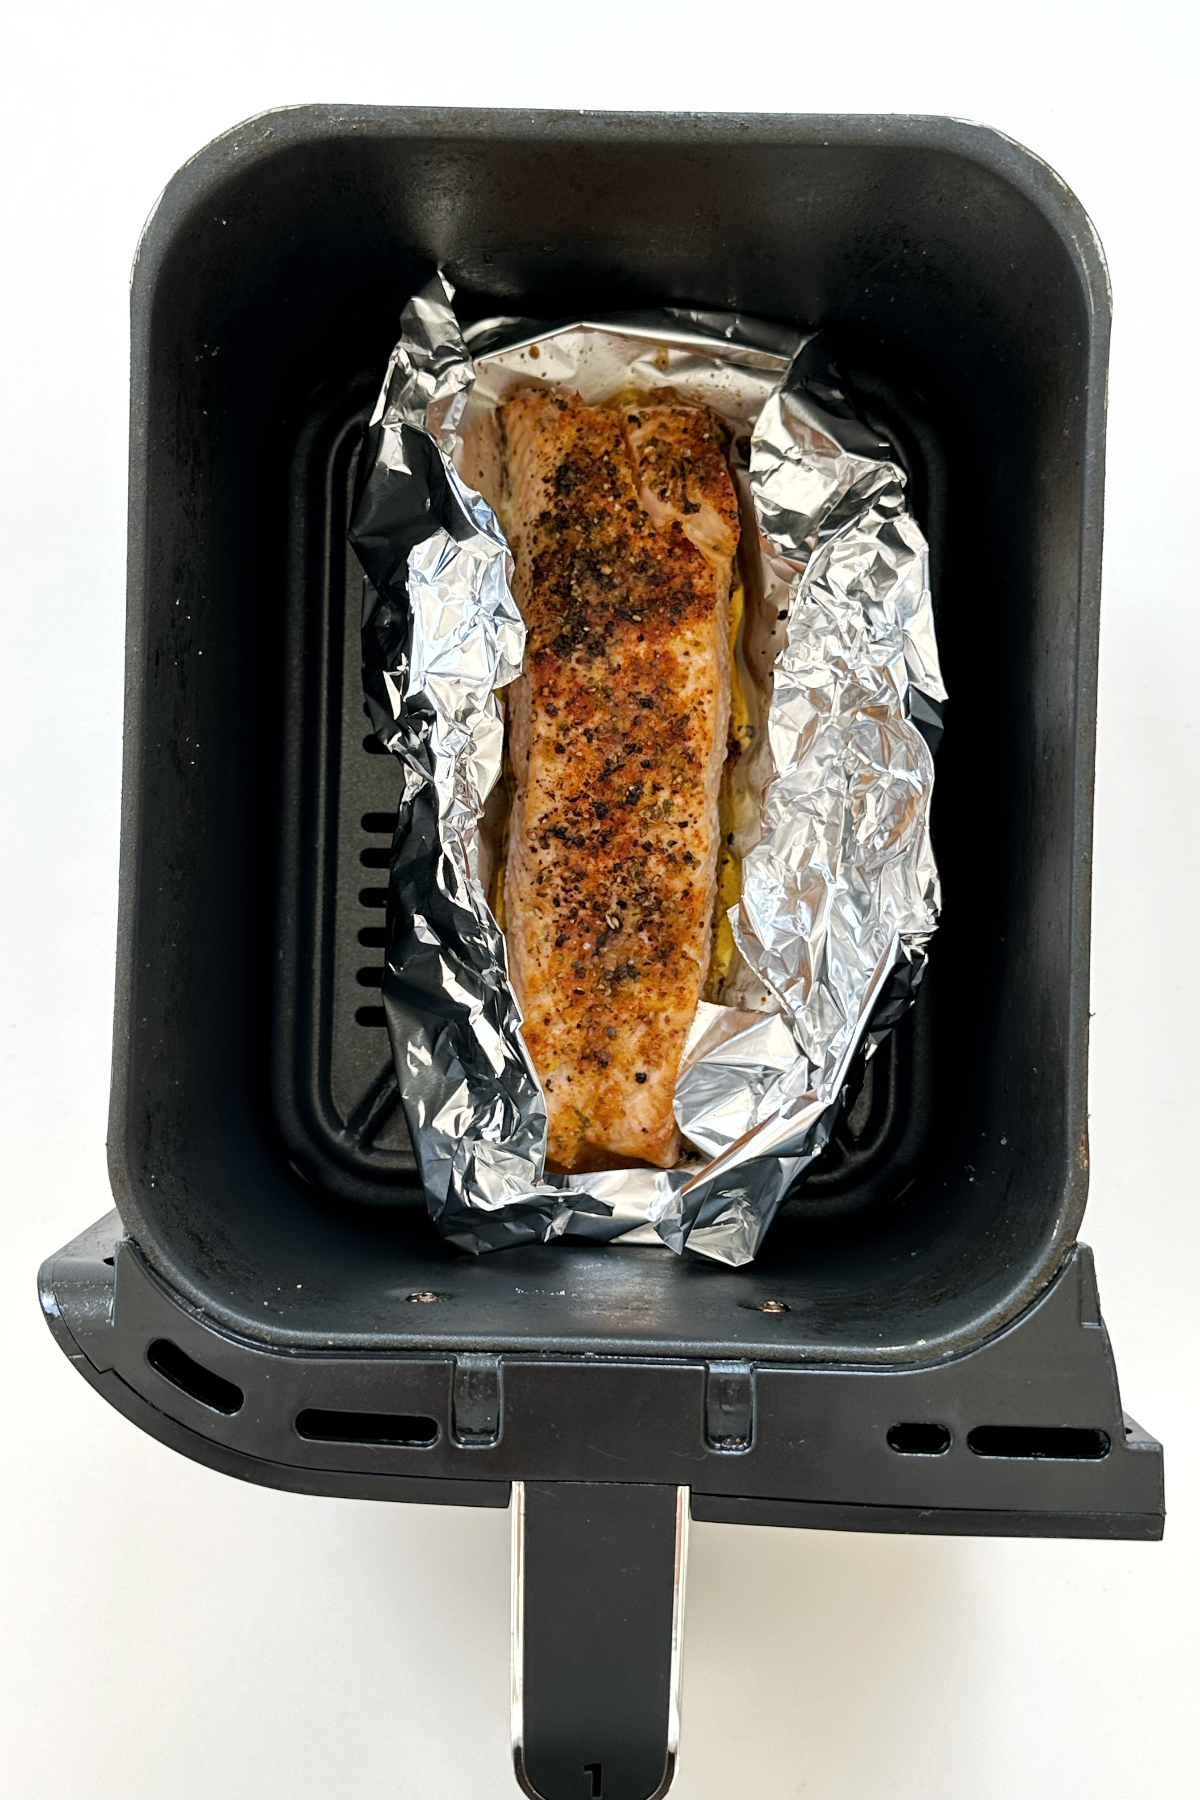 Cooked salmon in the air fryer. 